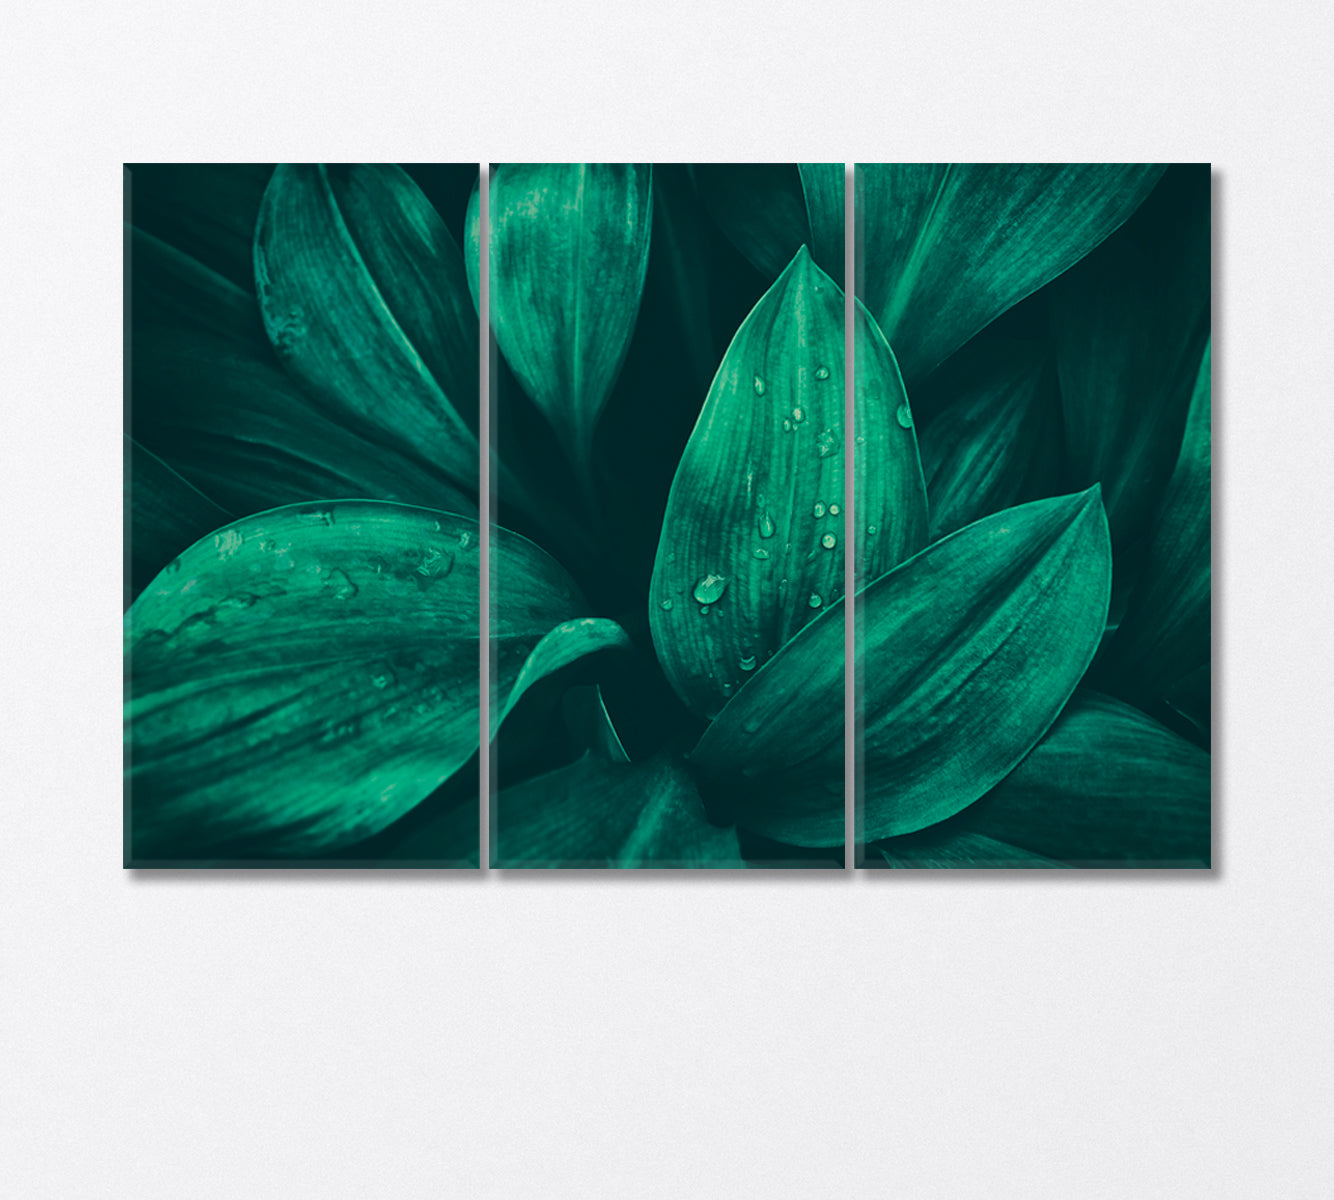 Water Droplets on Green Foliage in Tropical Rainforest Canvas Print-Canvas Print-CetArt-3 Panels-36x24 inches-CetArt